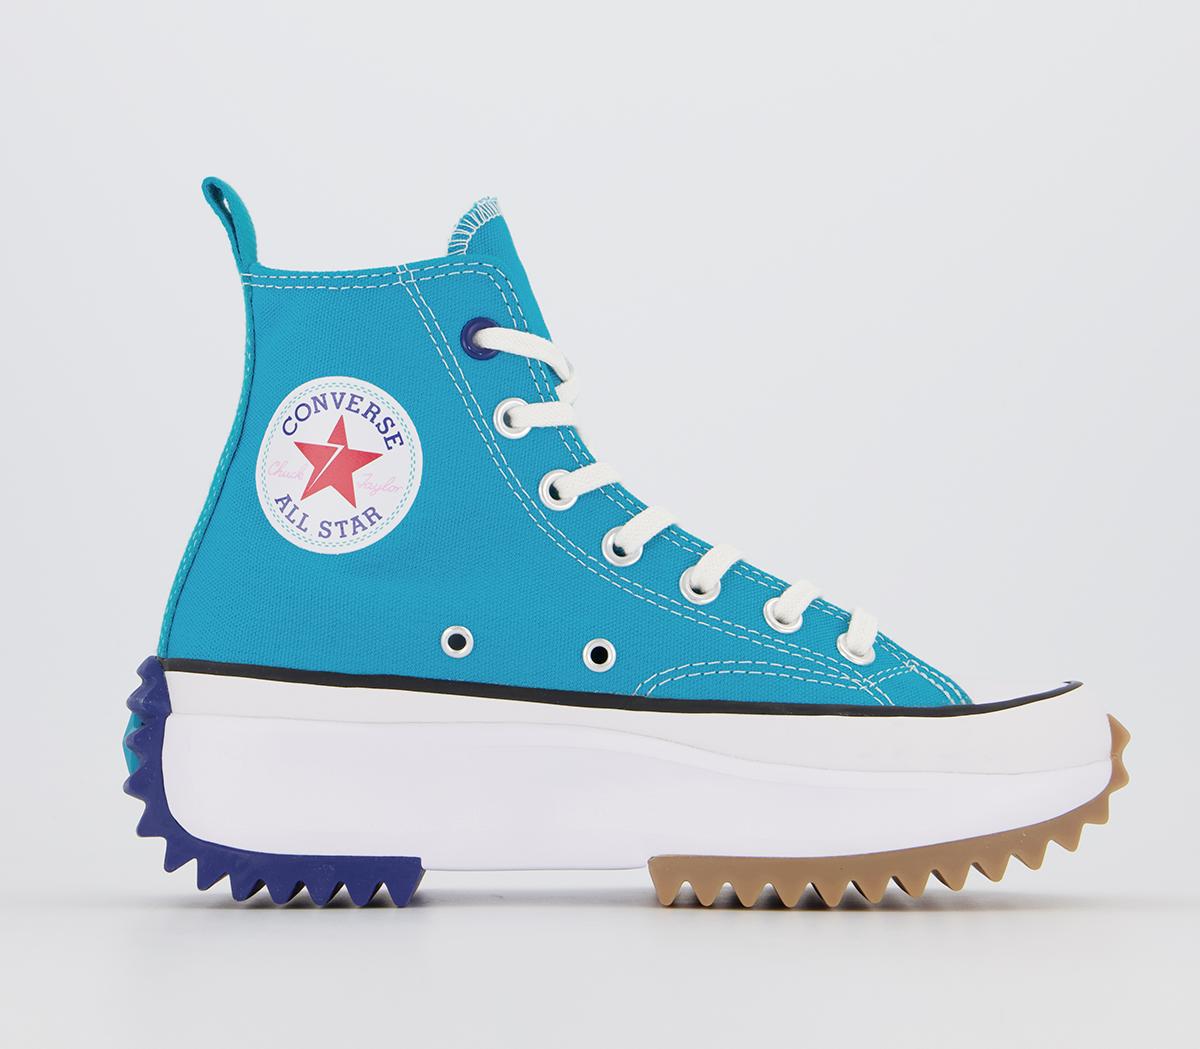 Converse Runstar Hike Trainers Rapid Teal Rush Blue White - Hers trainers